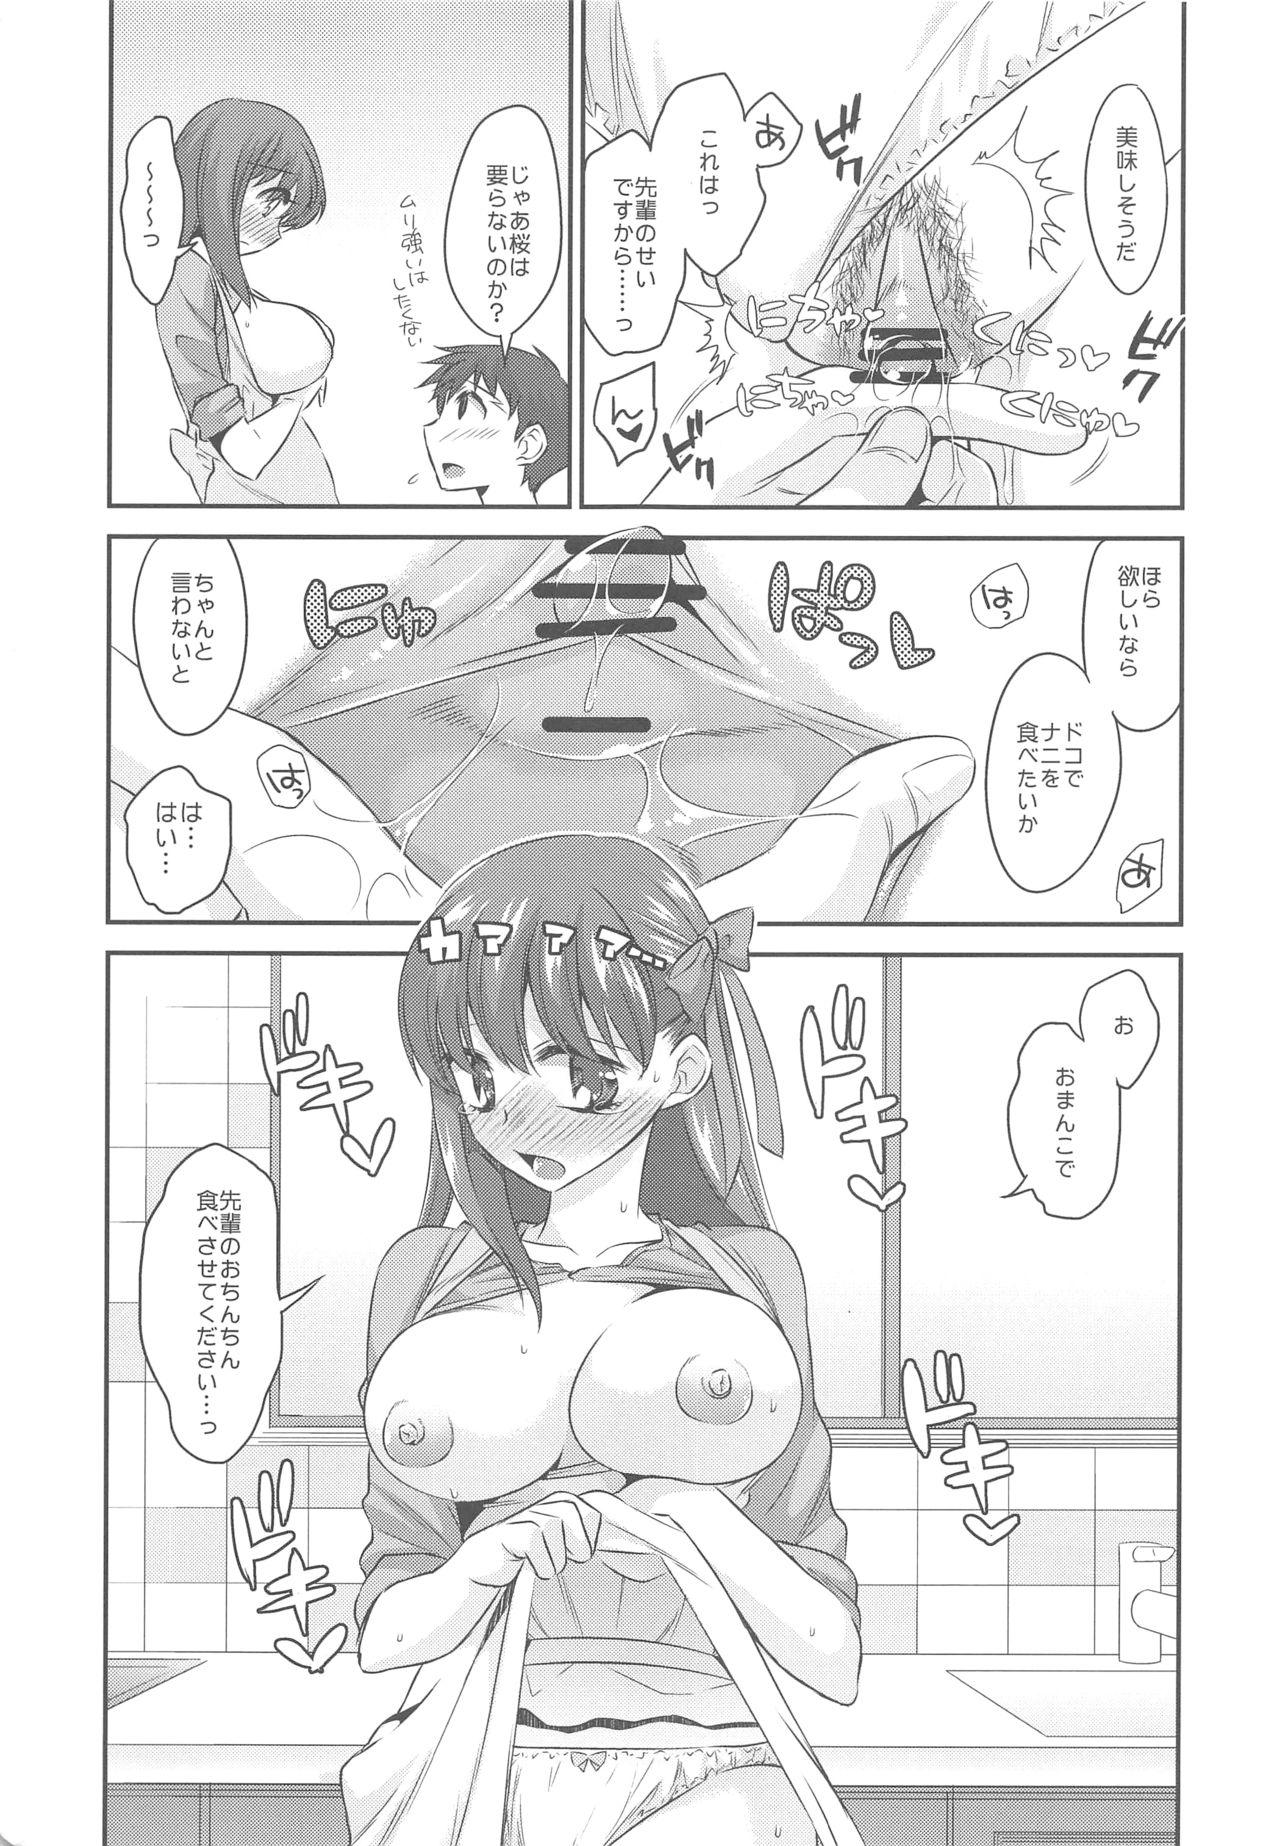 Couch Kitchen H - Fate stay night Scene - Page 11